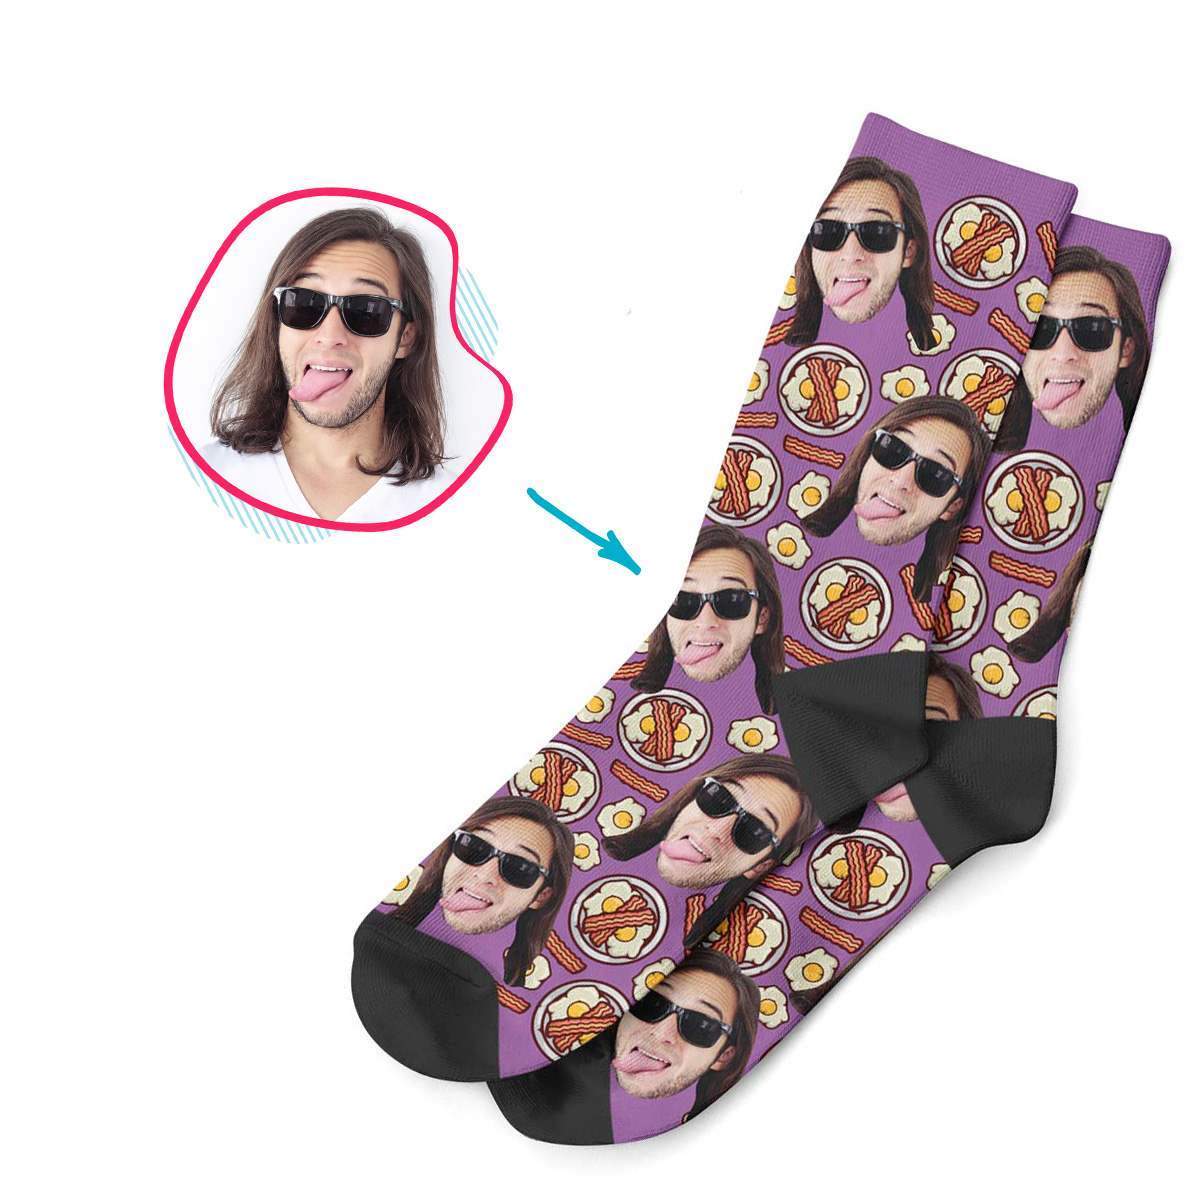 purple Bacon and Eggs socks personalized with photo of face printed on them